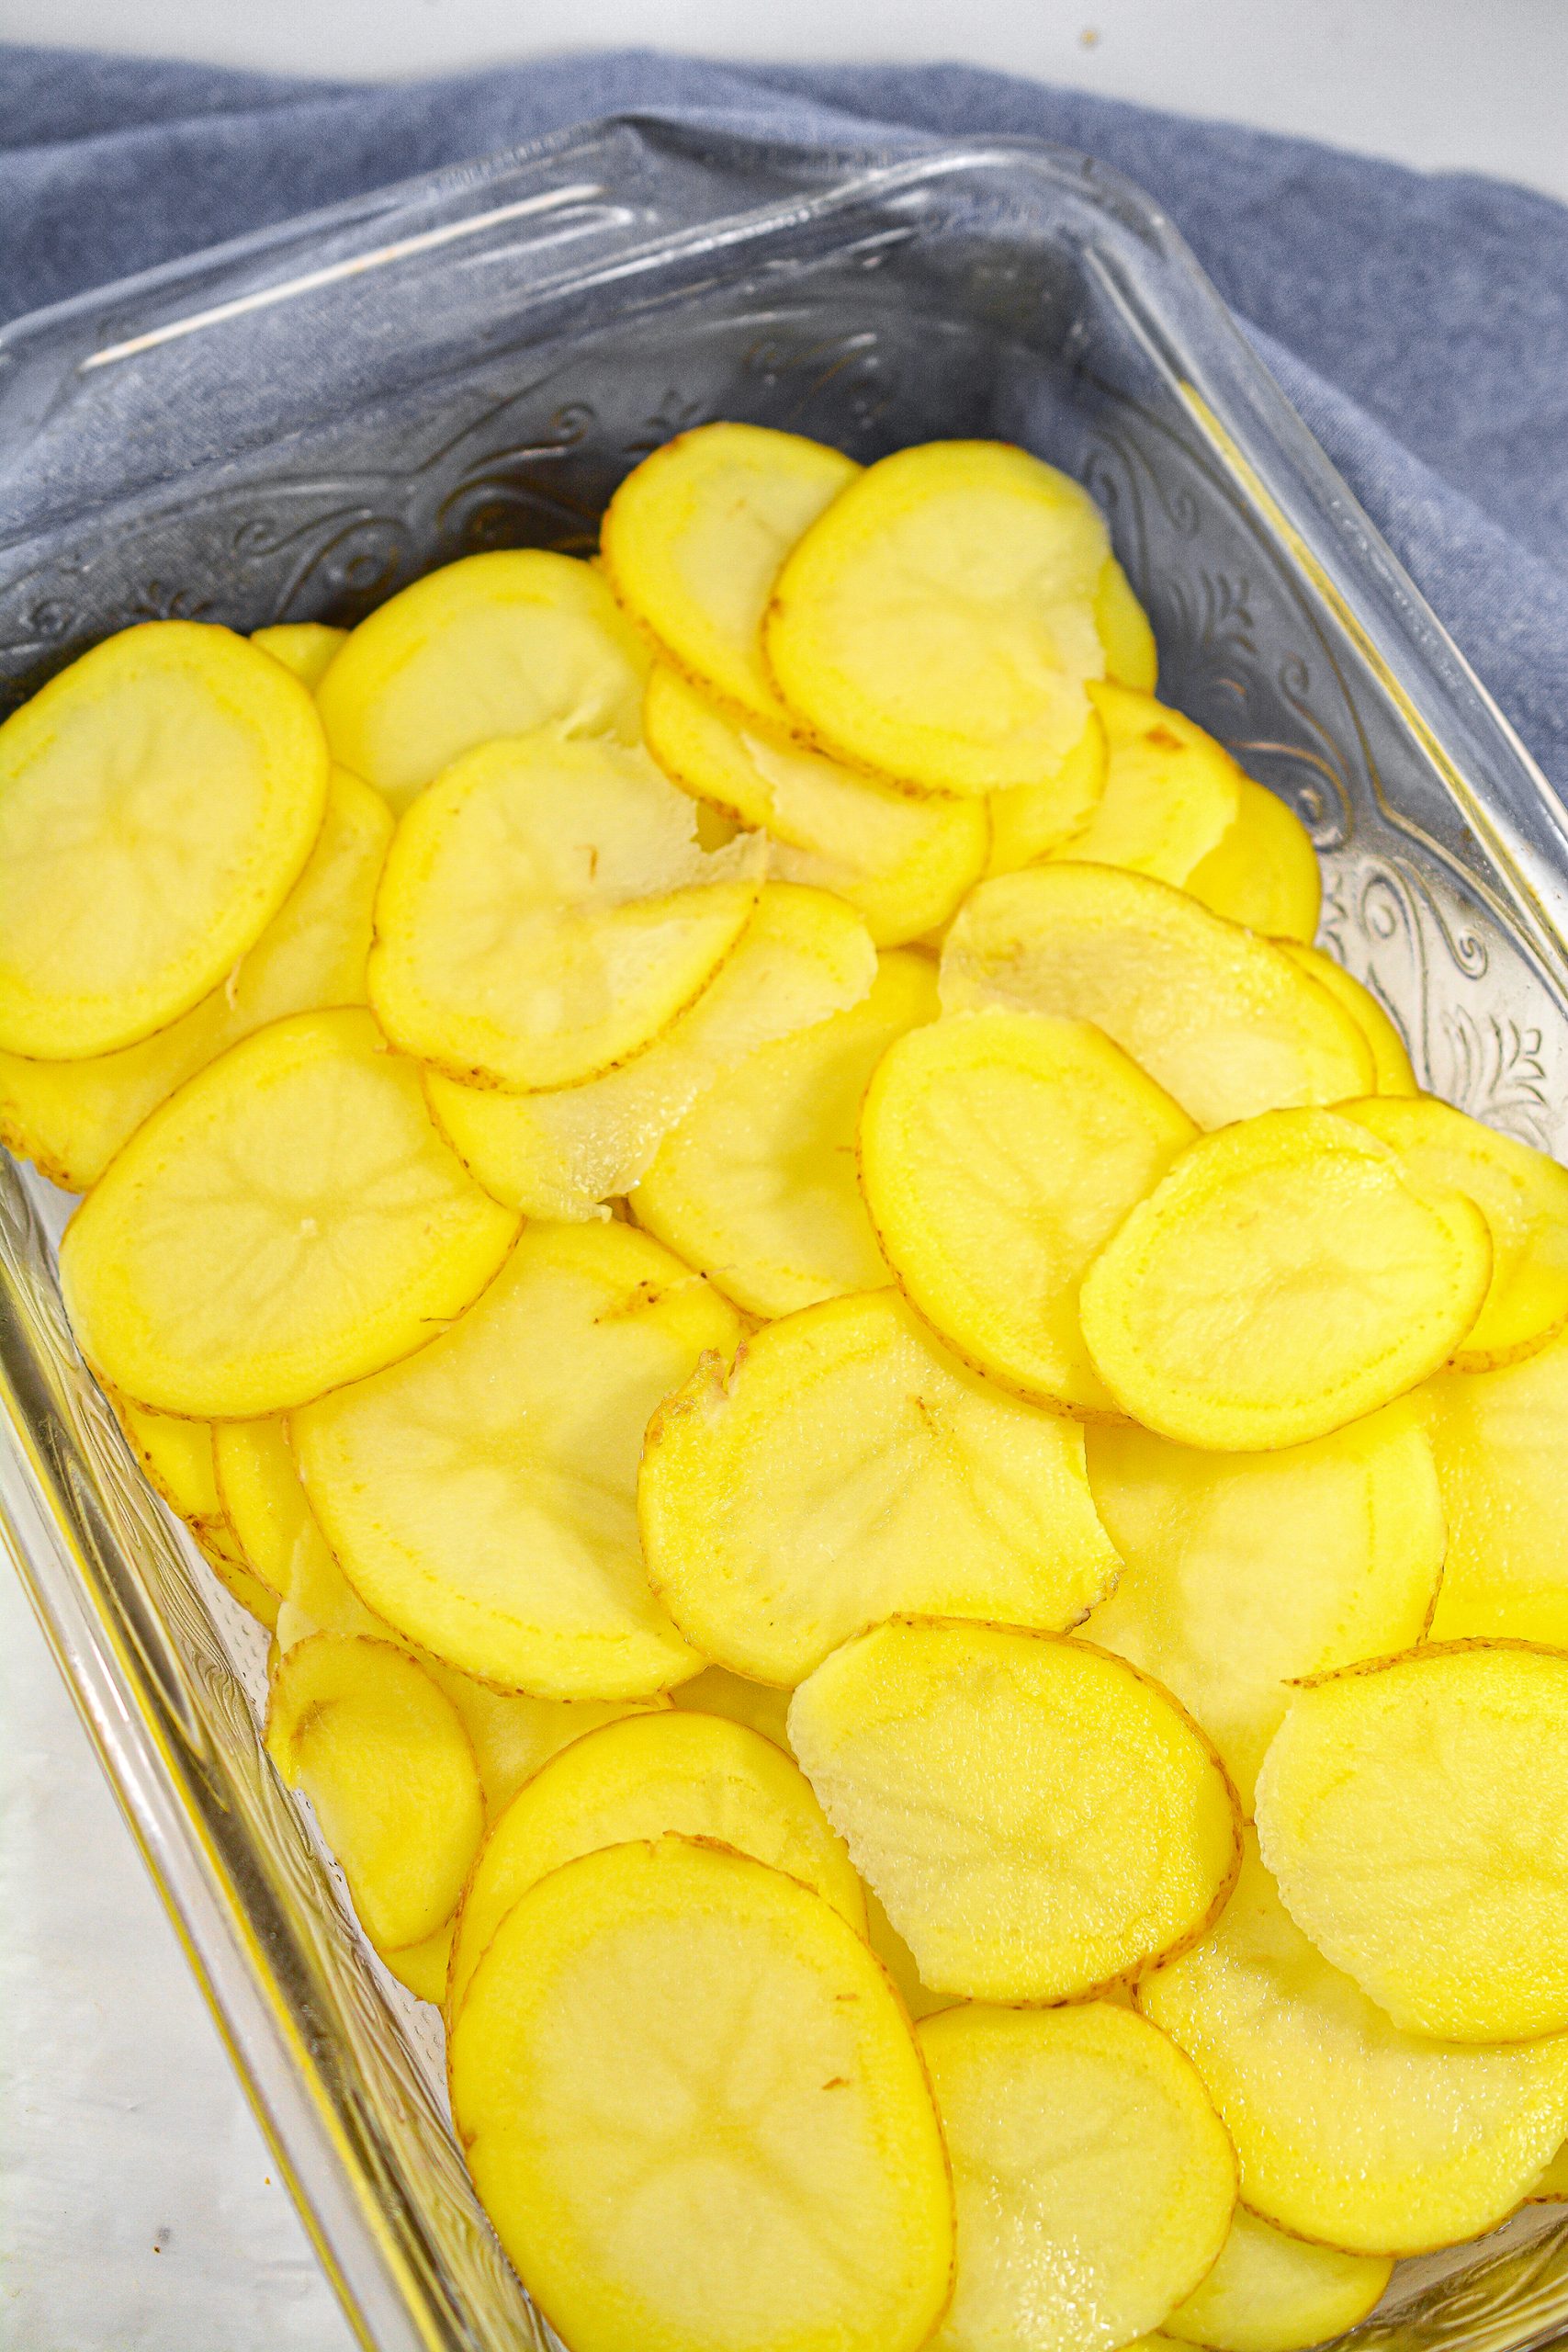 Layer the potatoes on the bottom of a well-greased 9x13 baking dish.